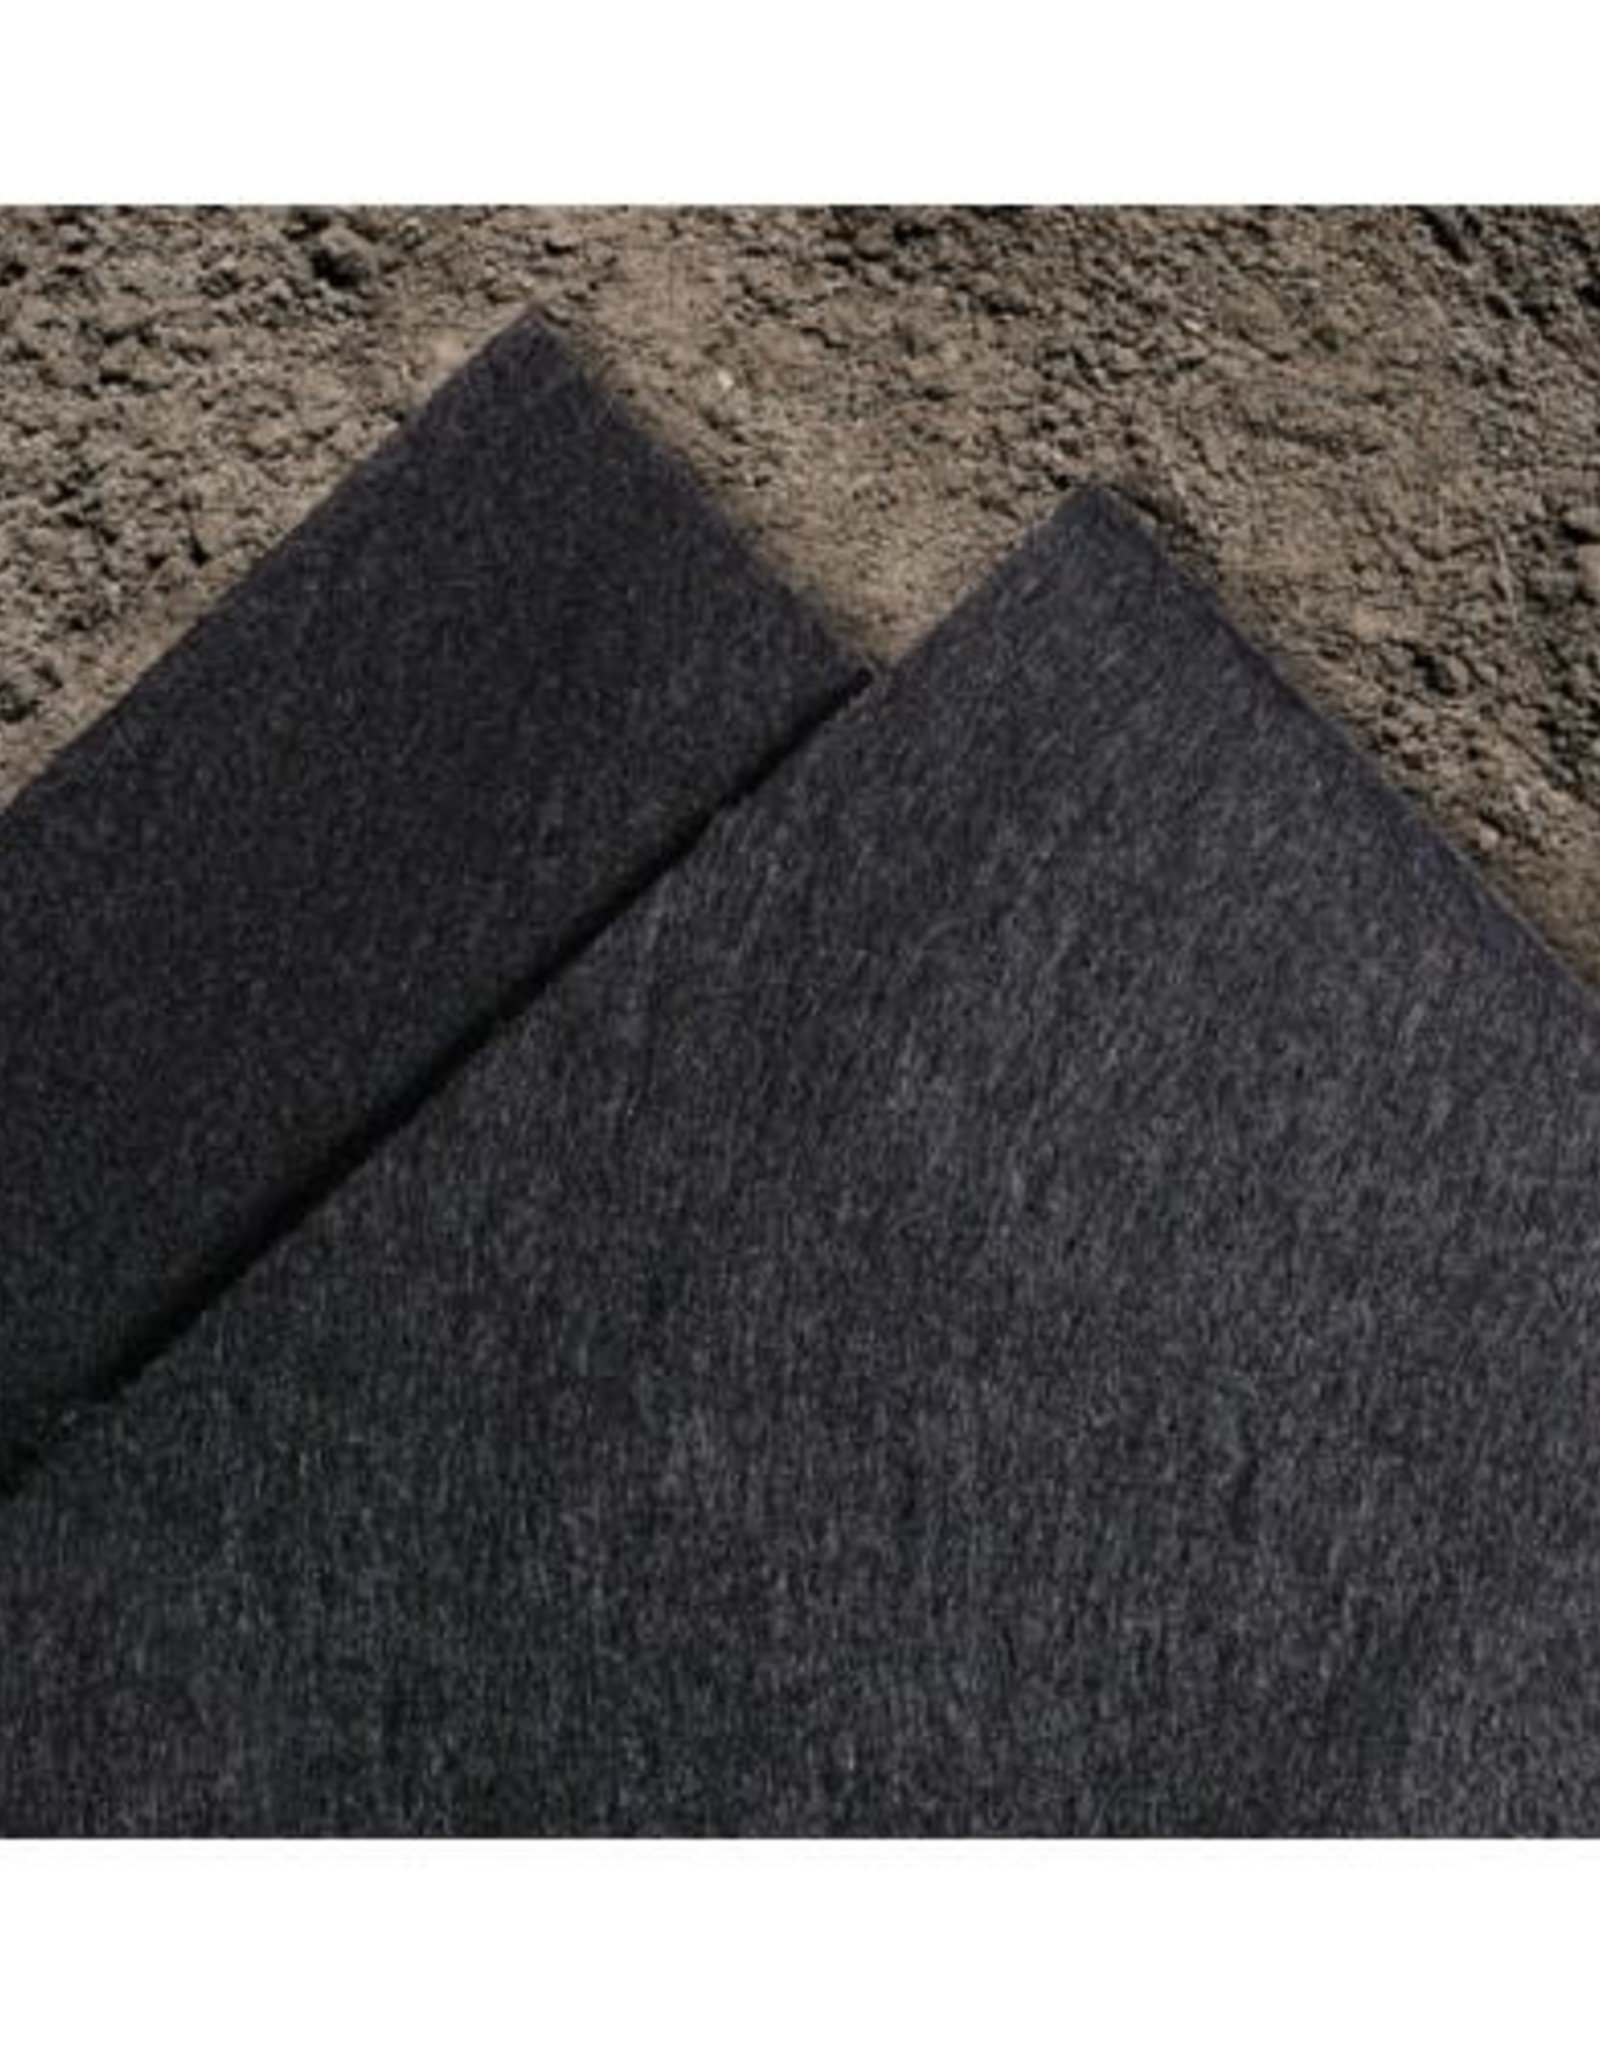 Geotextile, What is Geotextile Fabric